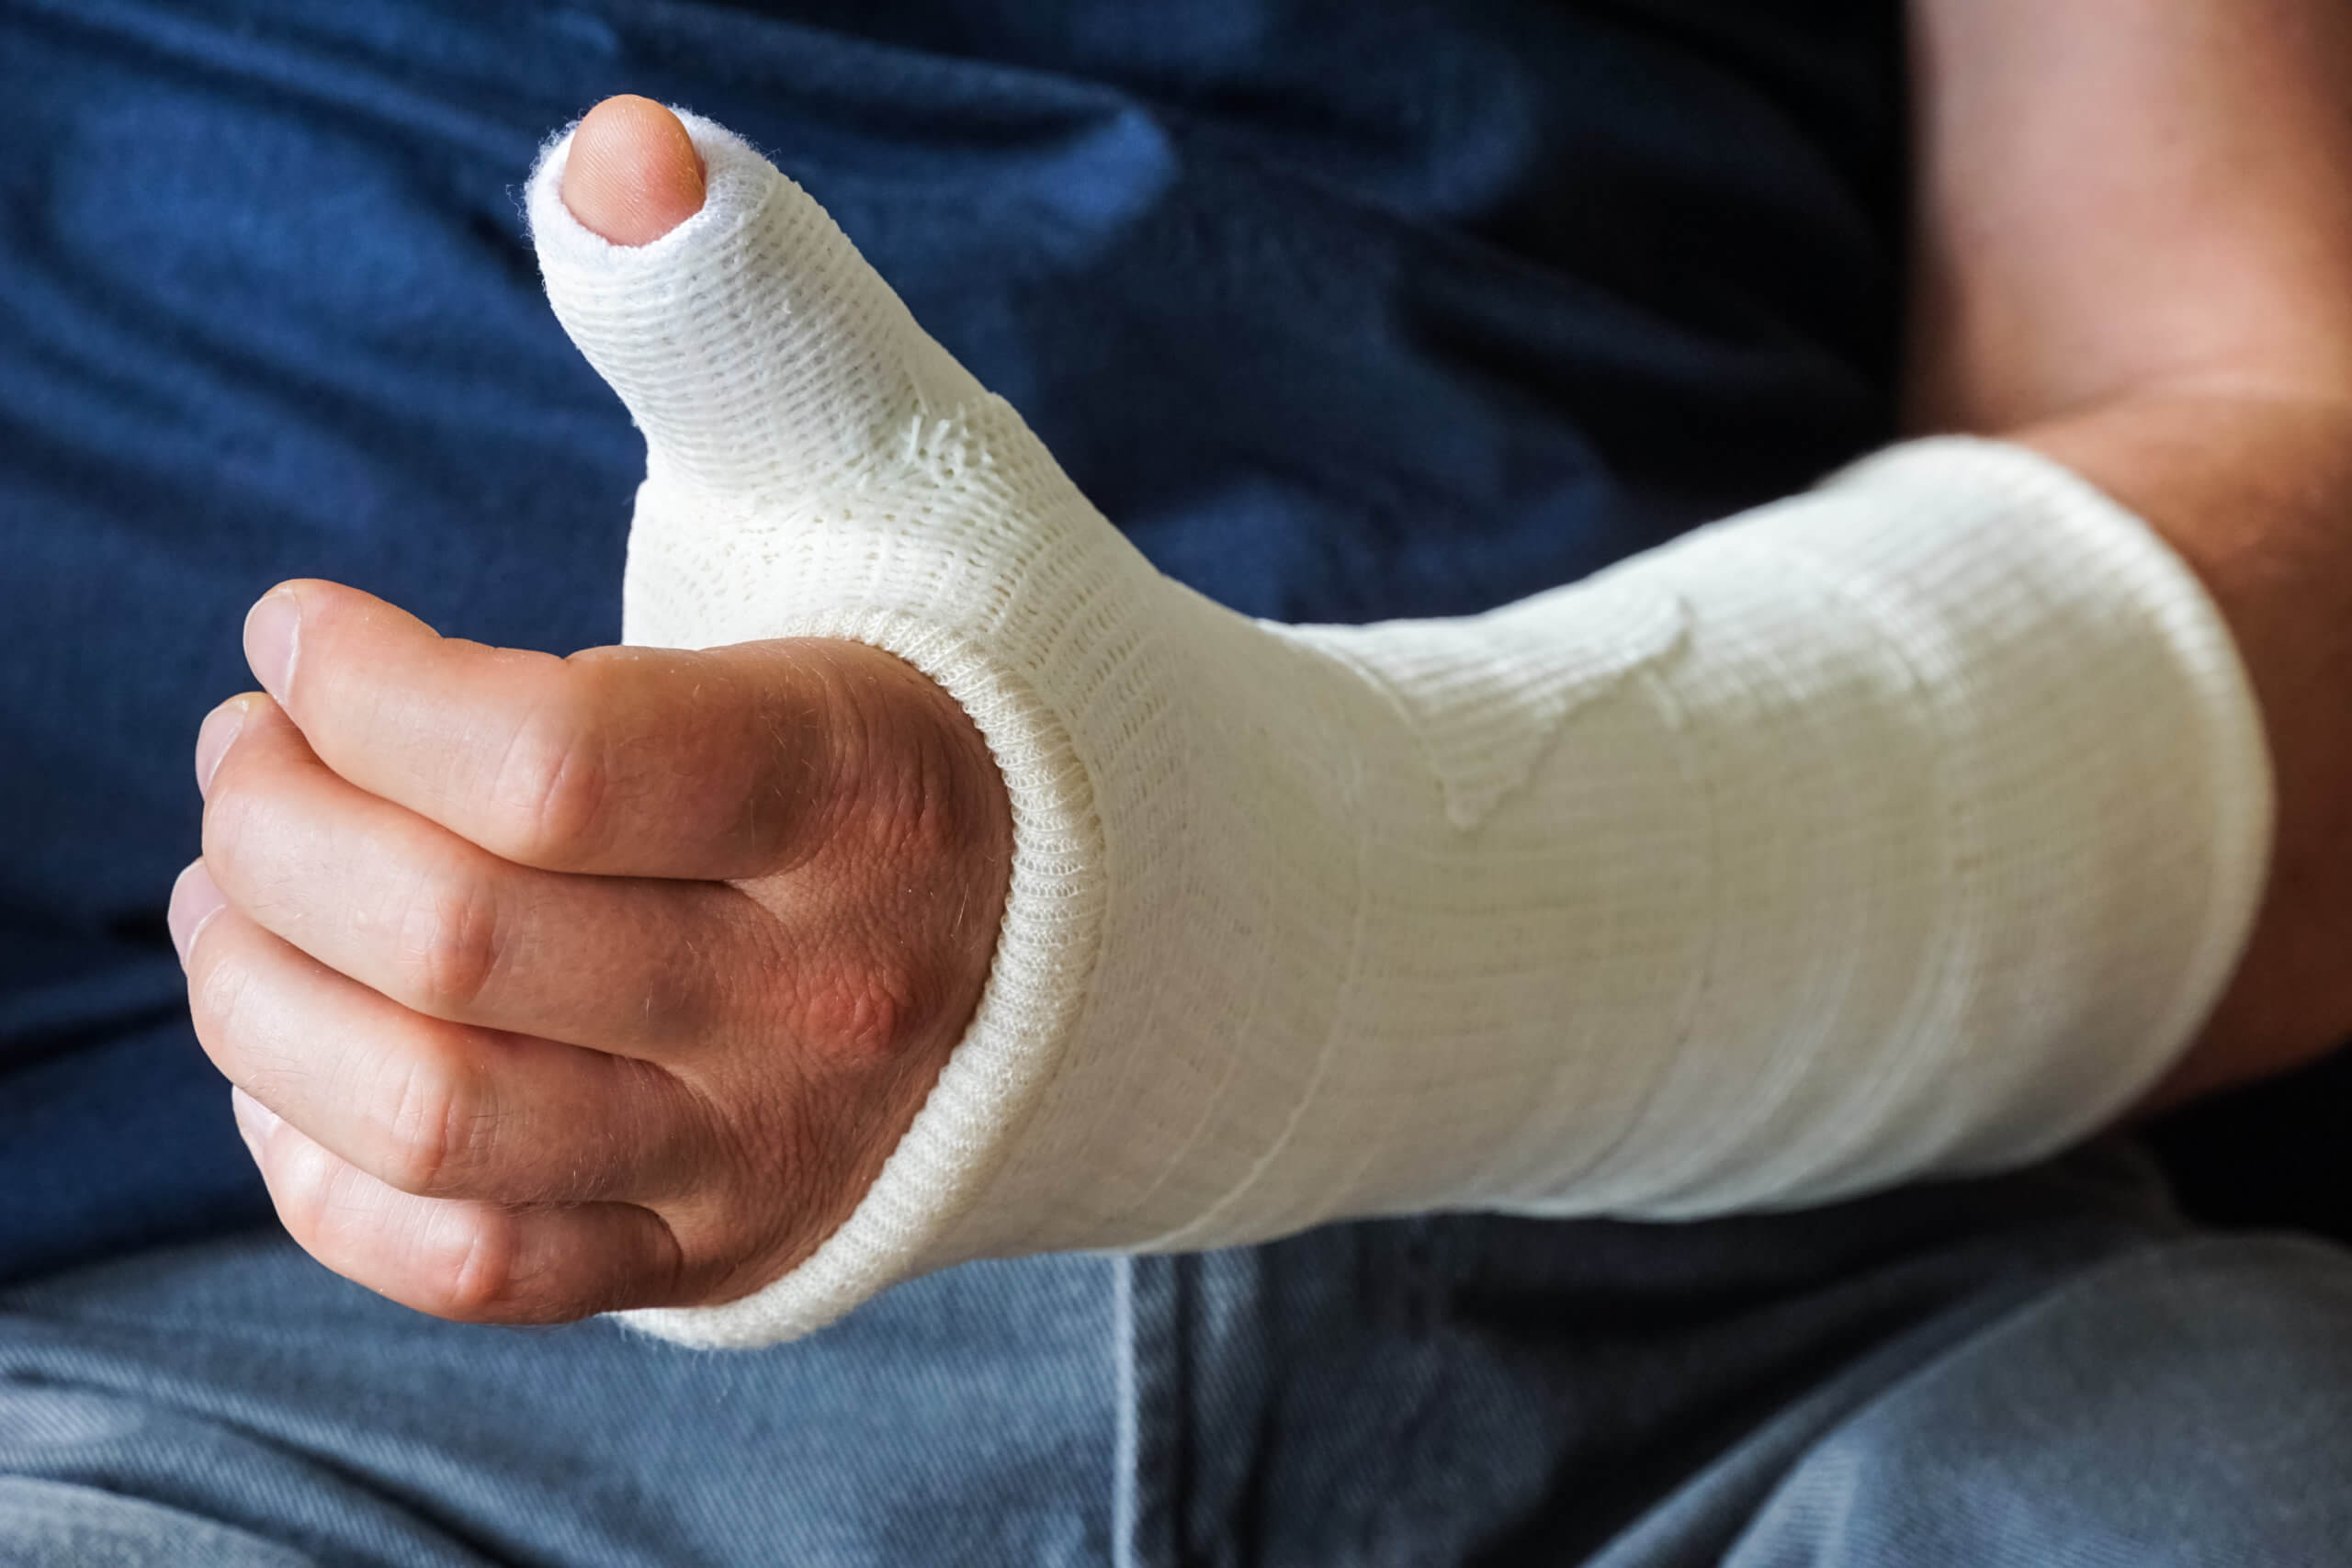 Man with a cast on wrist and thumb gives the “thumbs up.”